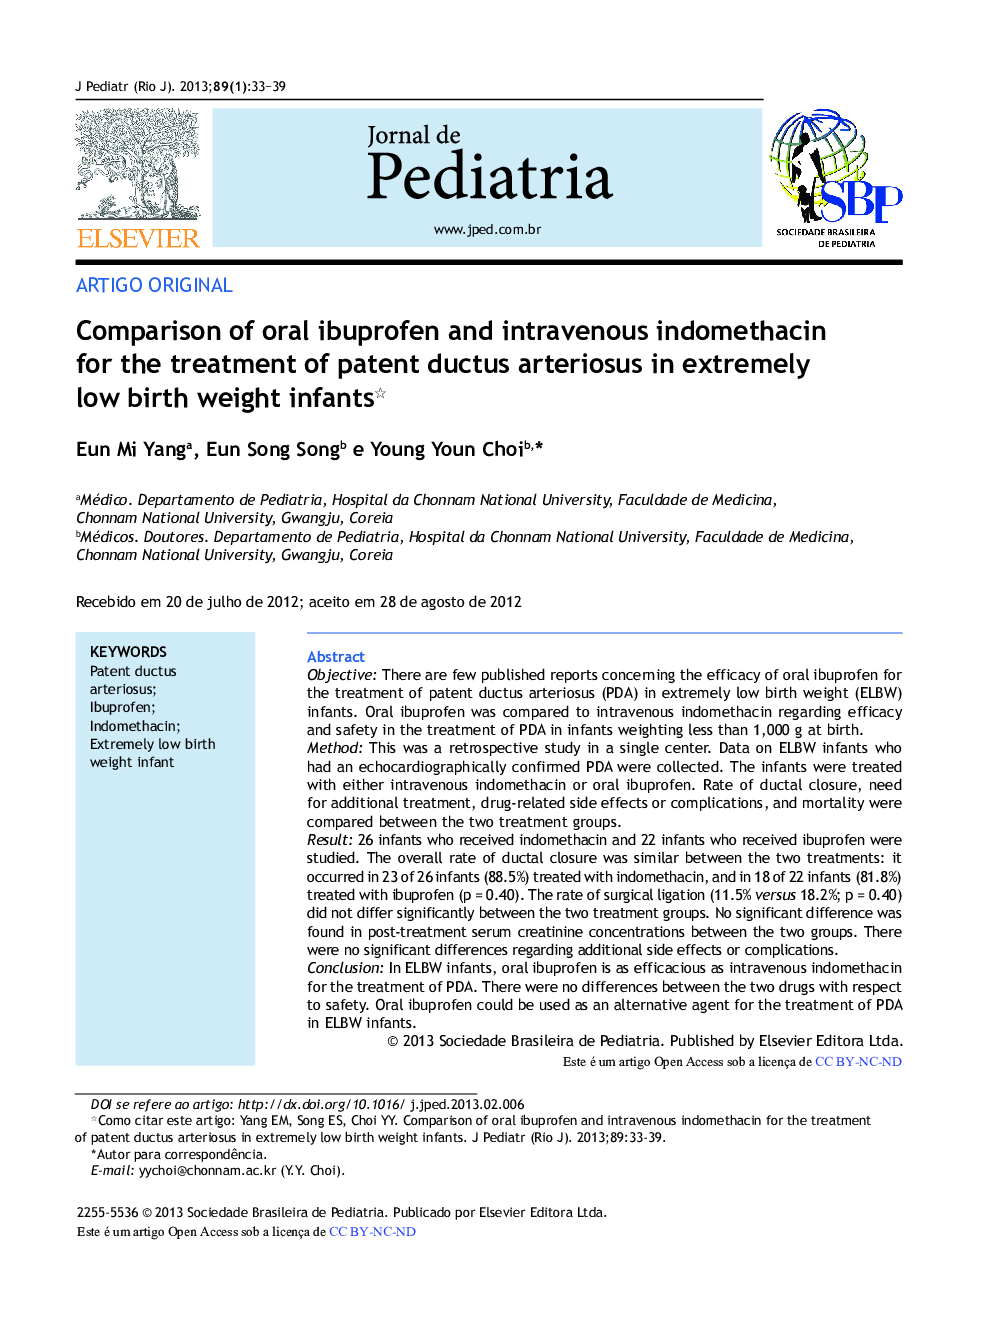 Comparison of oral ibuprofen and intravenous indomethacin for the treatment of patent ductus arteriosus in extremely low birth weight infants 